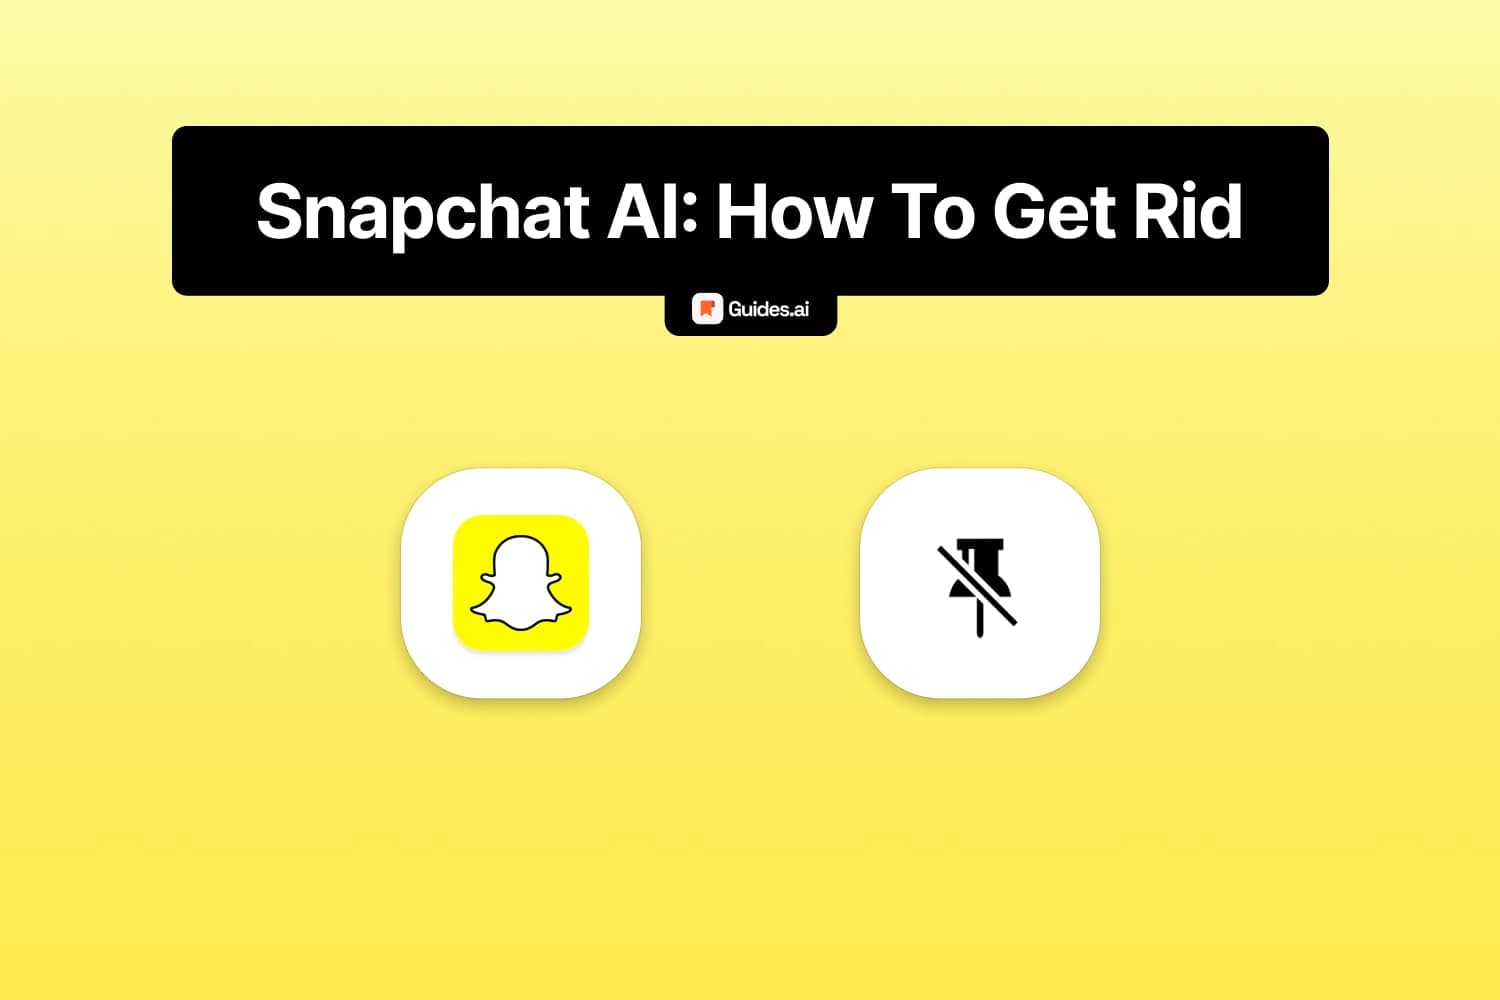 How to get rid of Snapchat AI